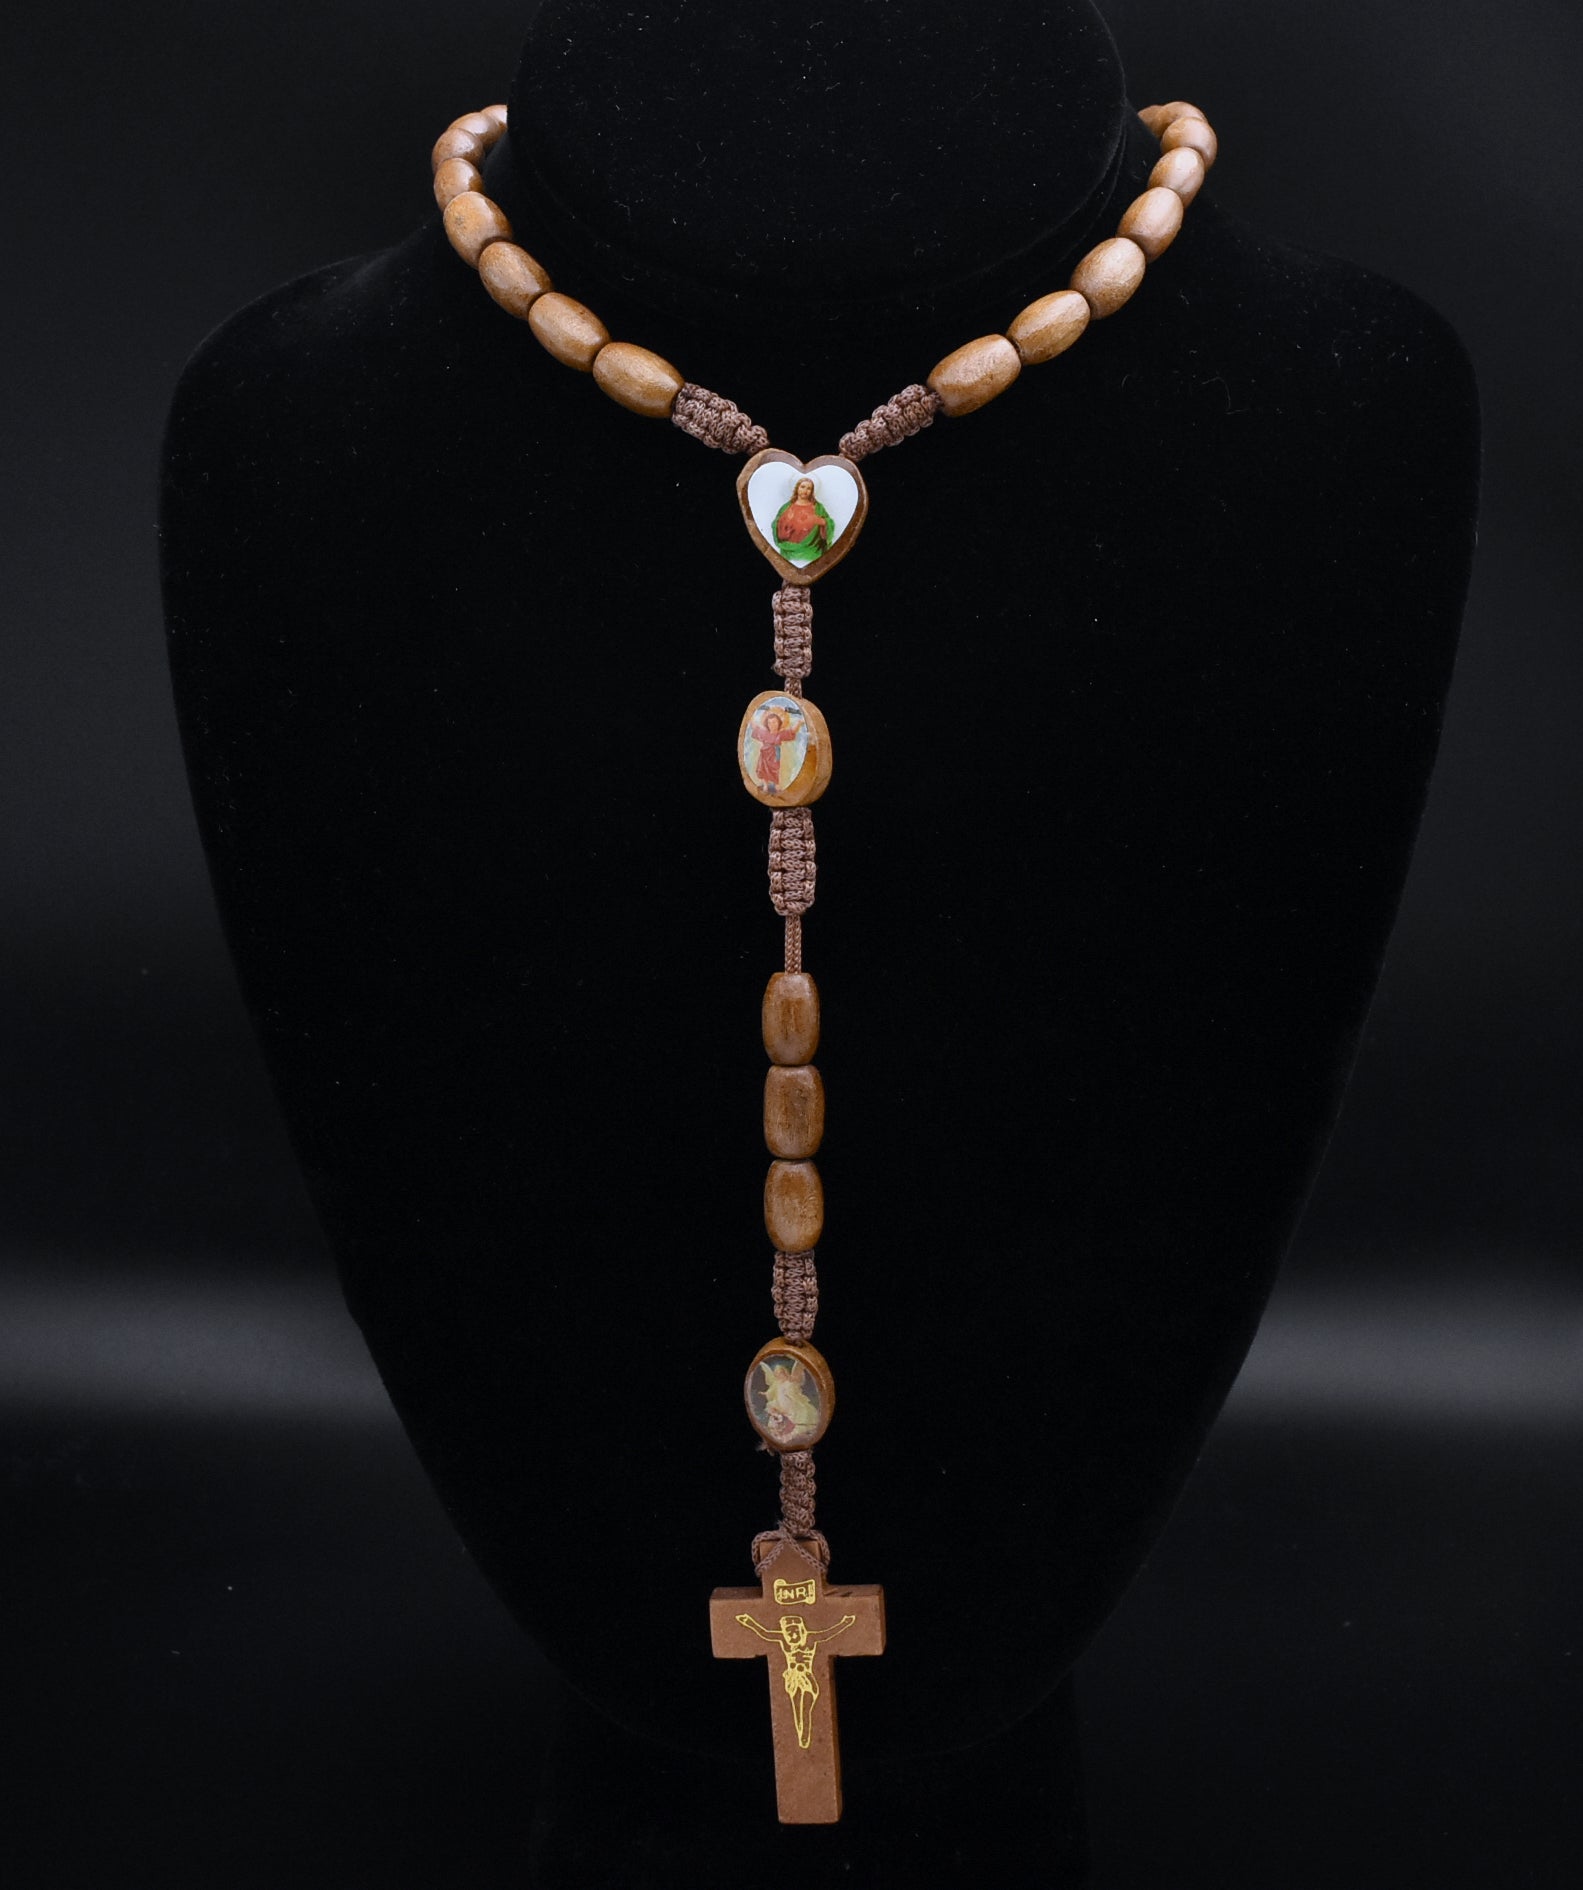 Vintage Wood Rosary Necklace - 32"